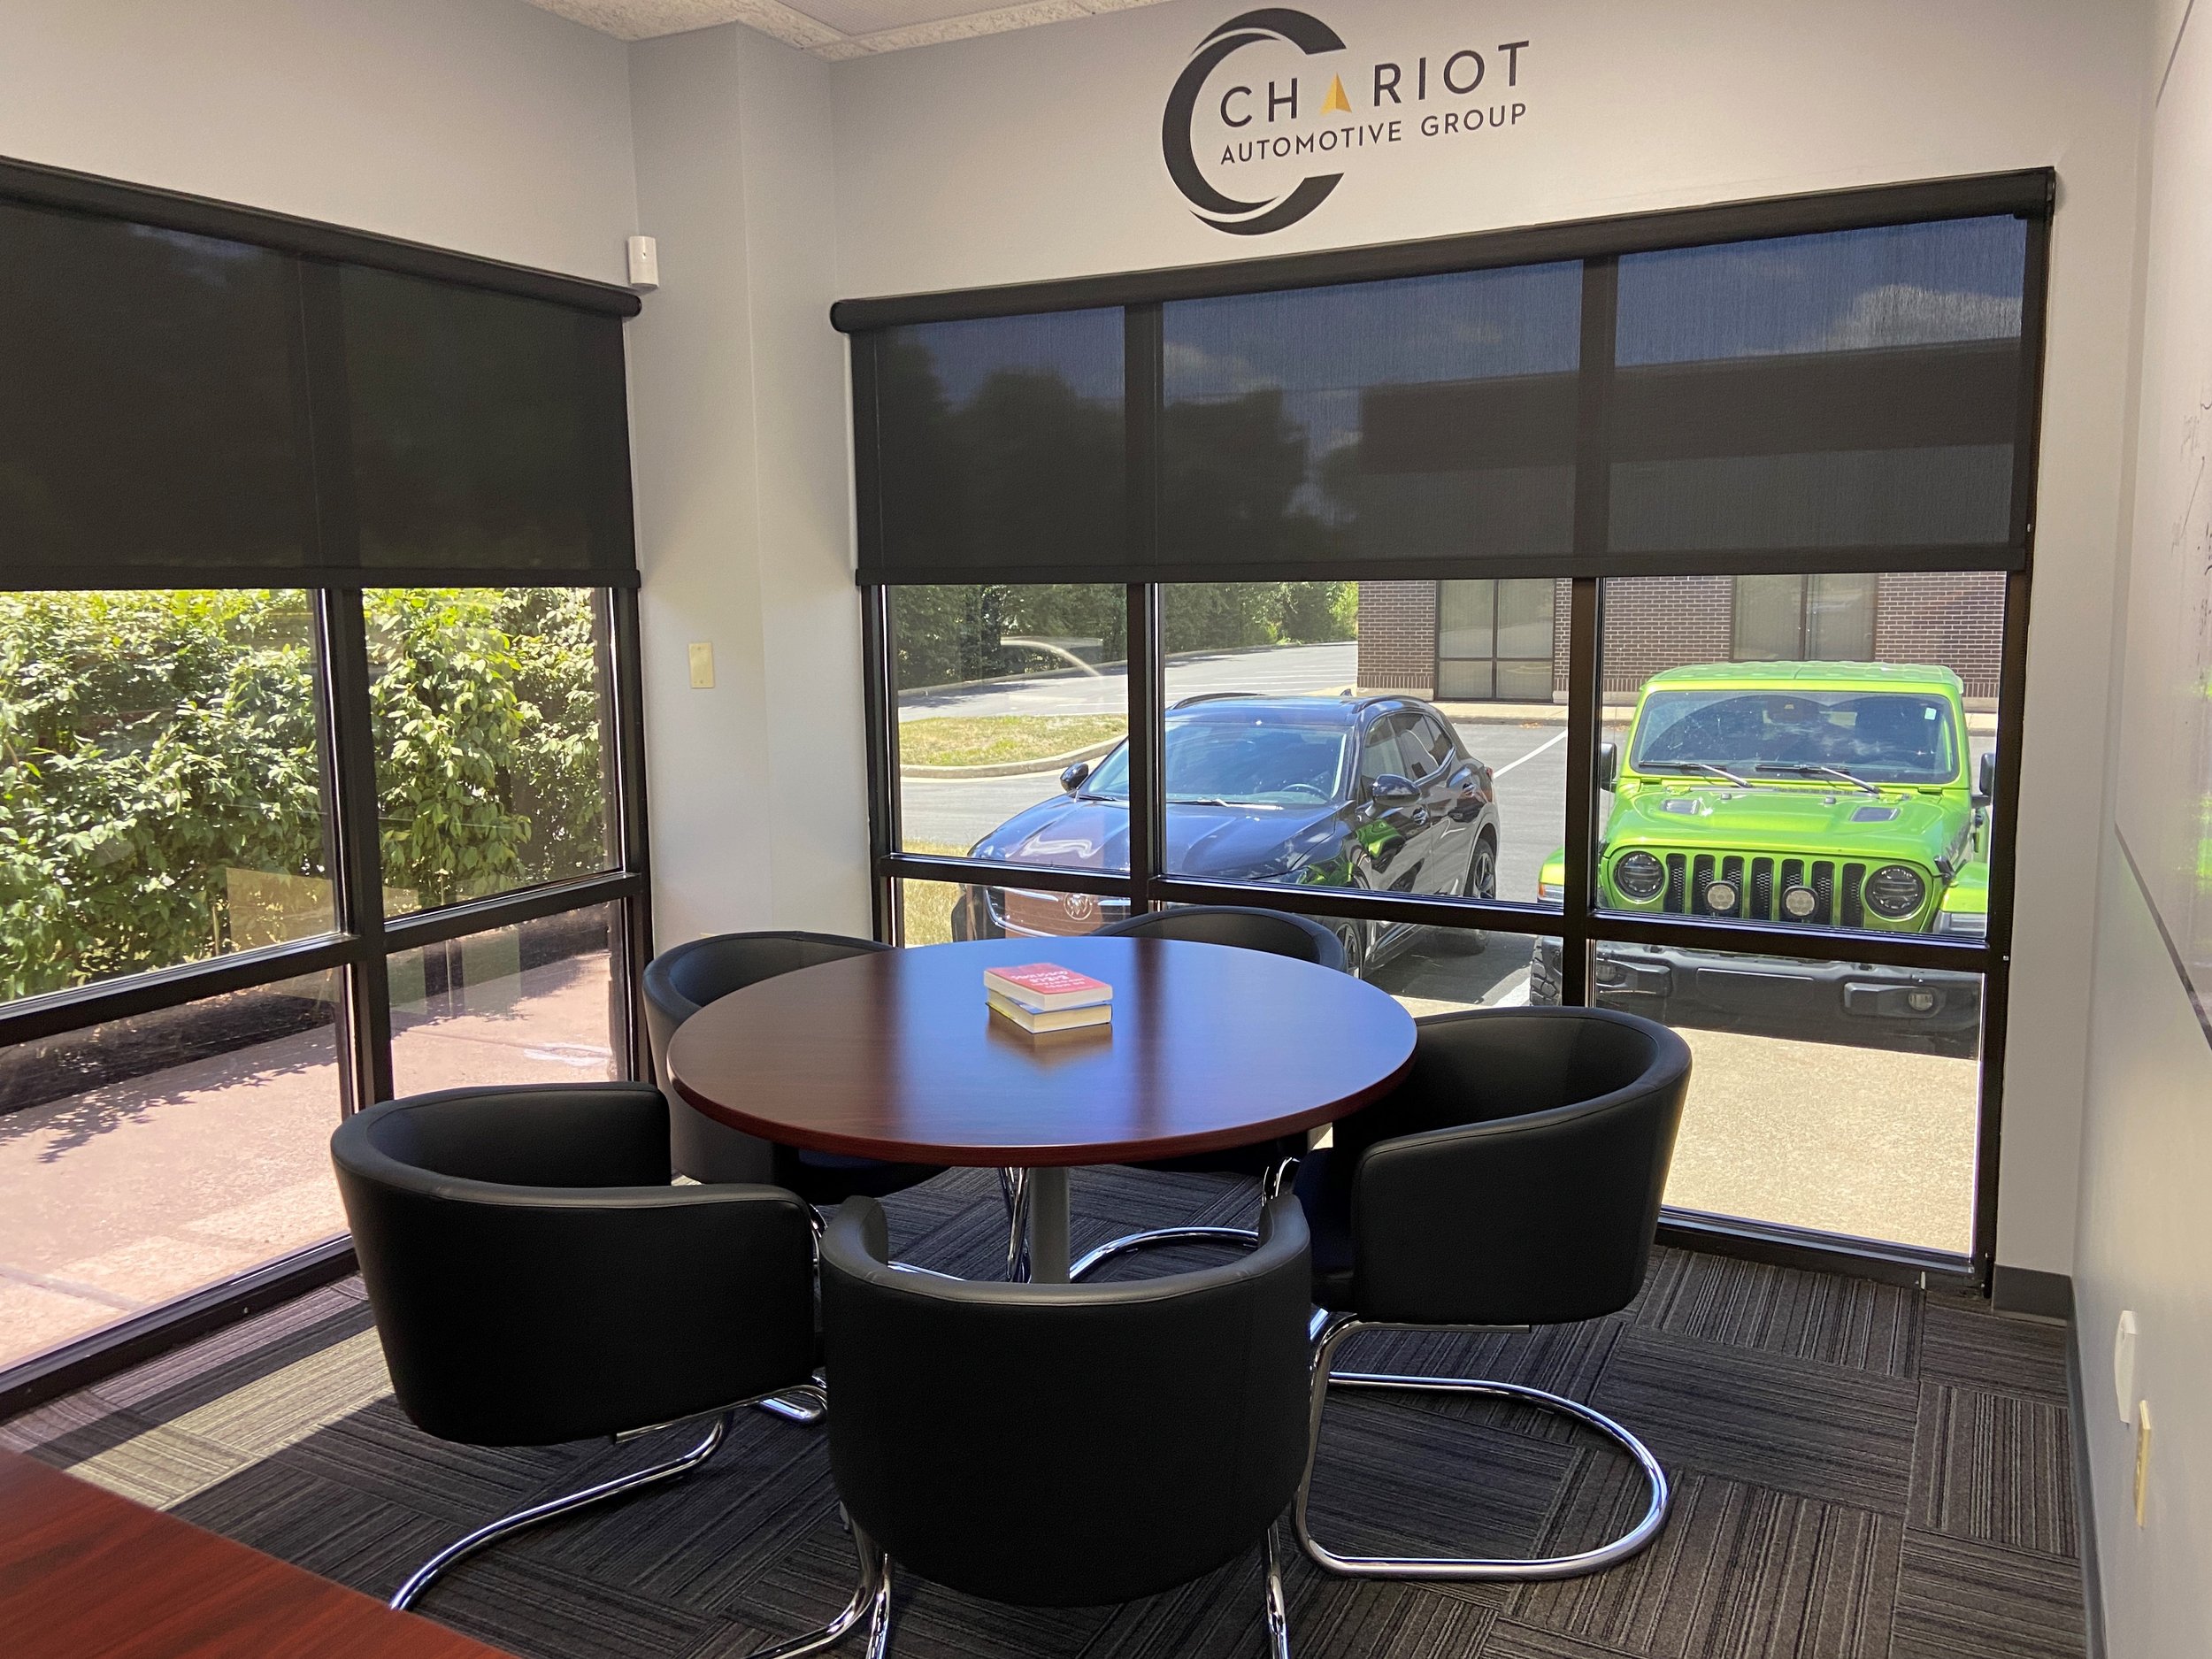  Hunter Douglas Designer Screen Shades in 1% opacity installed at Chariot Automotive Group 